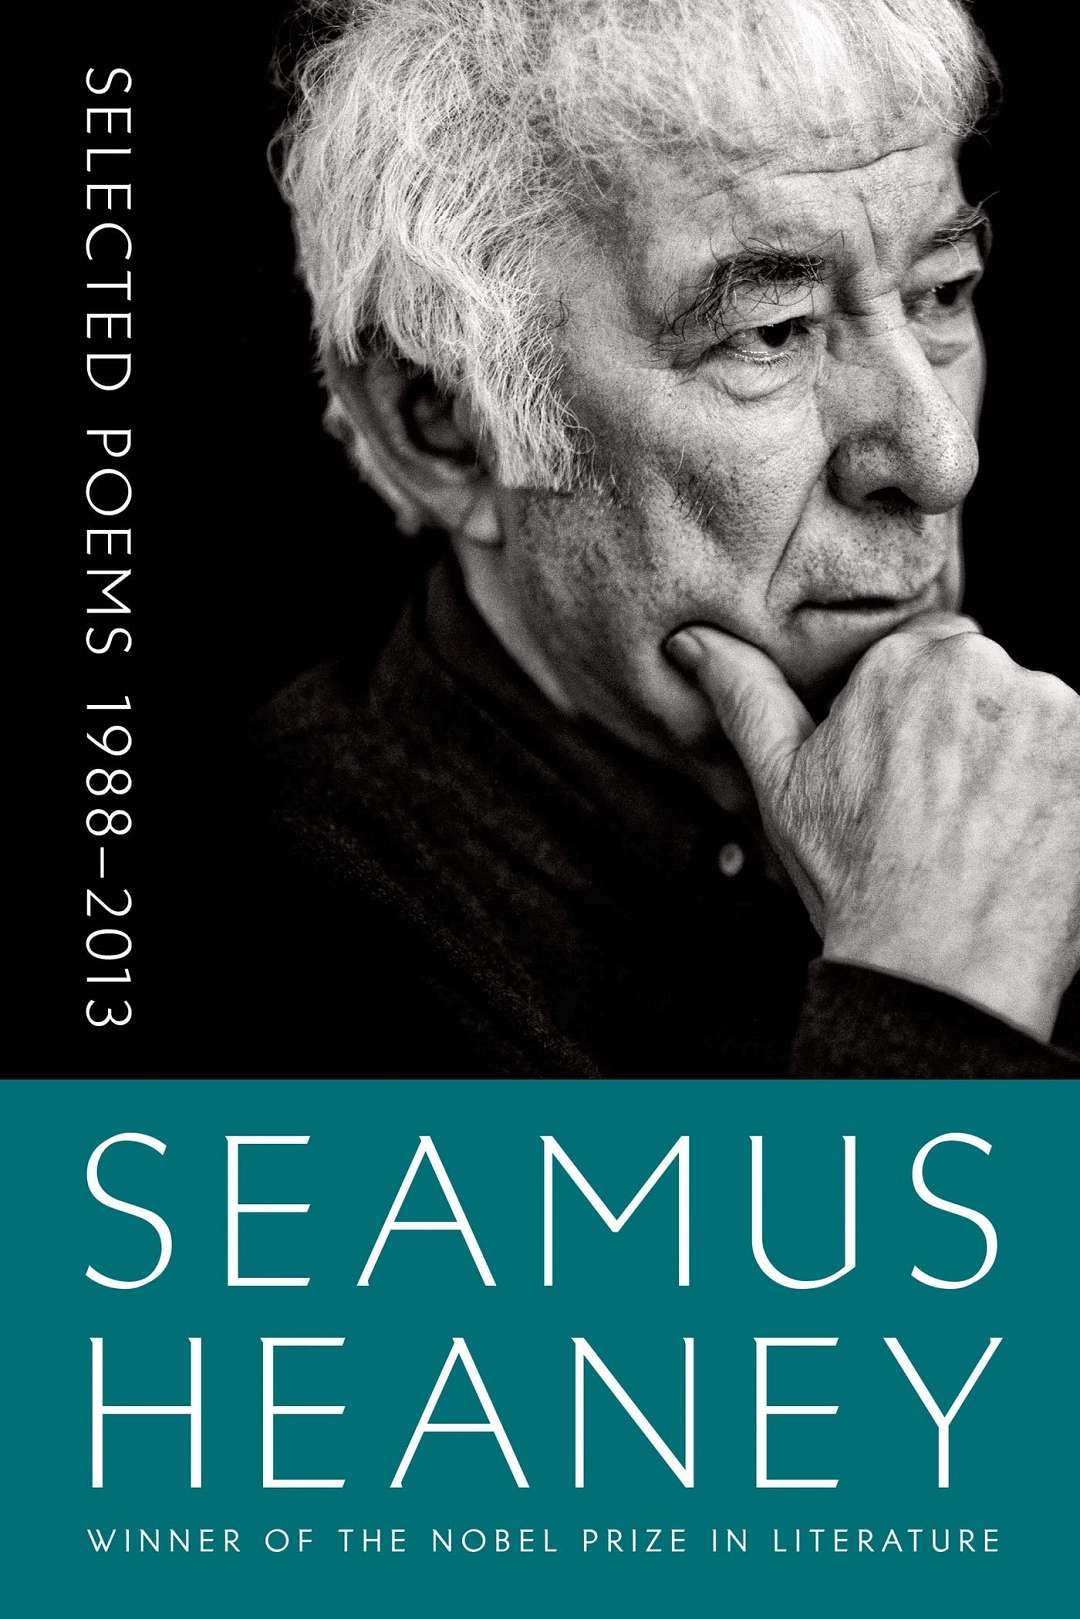 Abbot Public Library will resume its seasonal Poetry Salon with a discussion of poet Seamus Heaney's works on Nov. 17